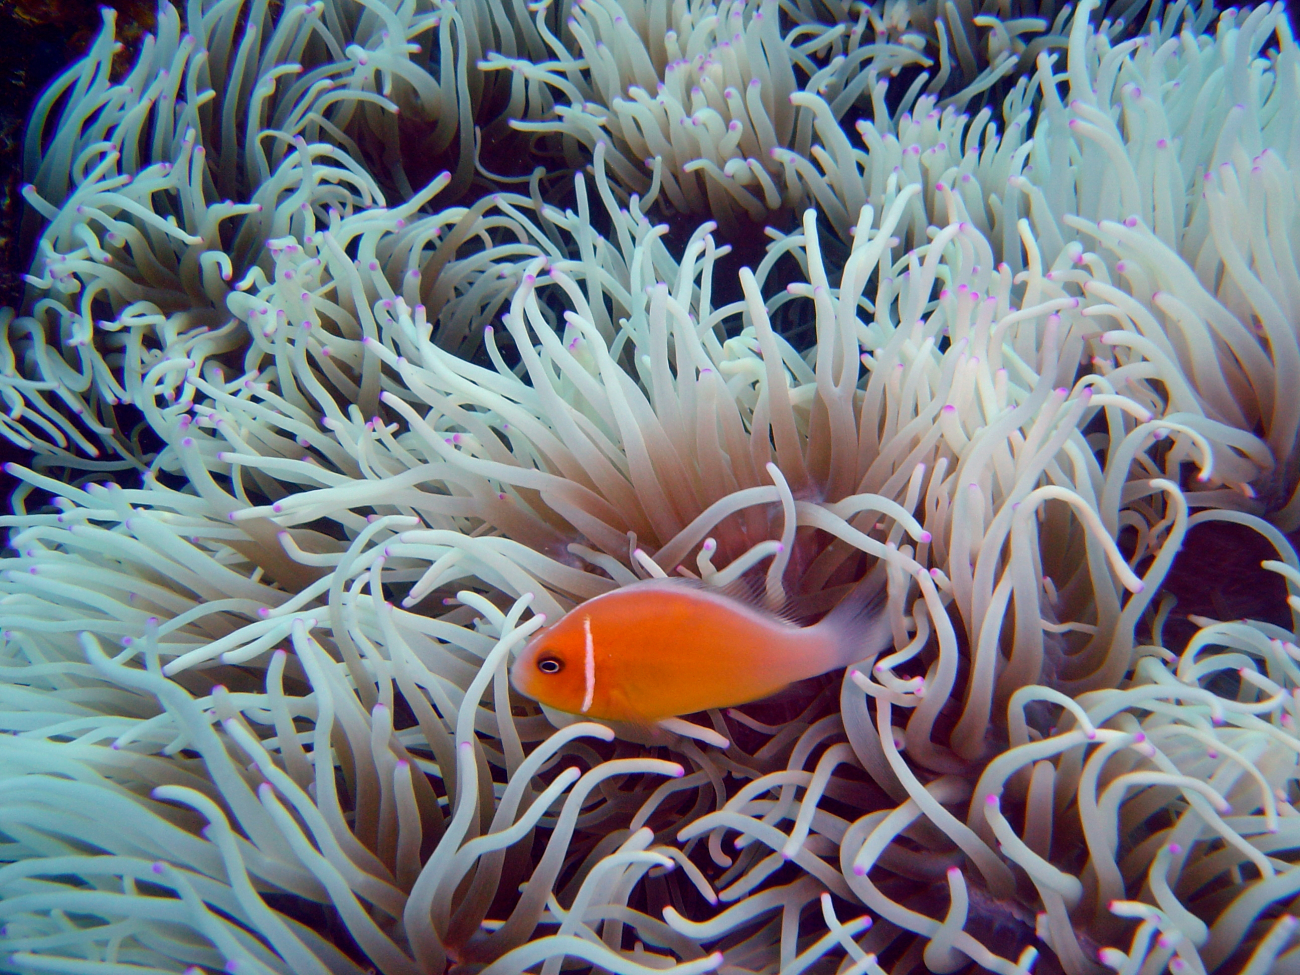 Sea anemone with pink anemonefish (Amphiprion perideraion